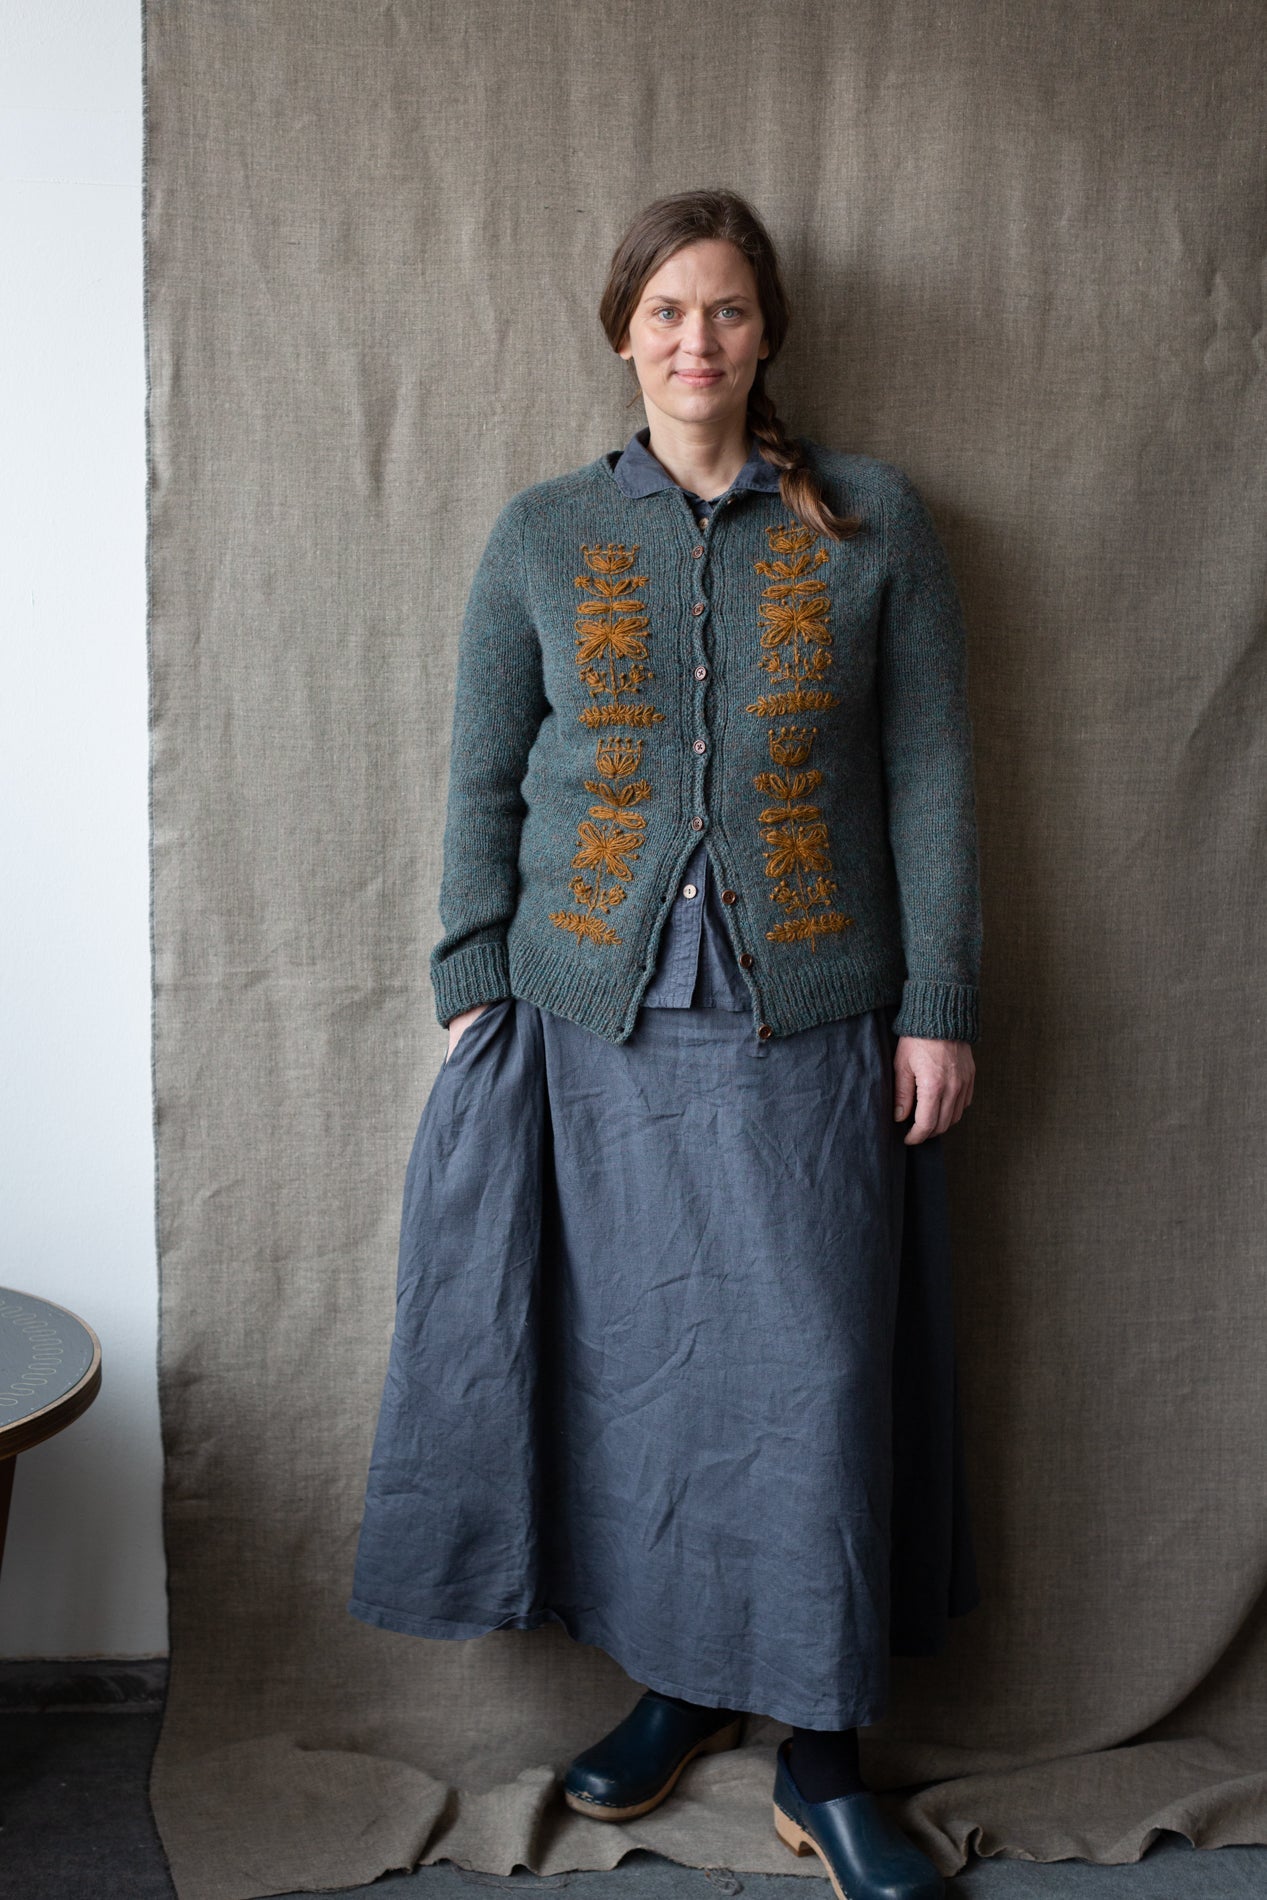 Embroidery on Knits - Books - Laine - The Little Yarn Store